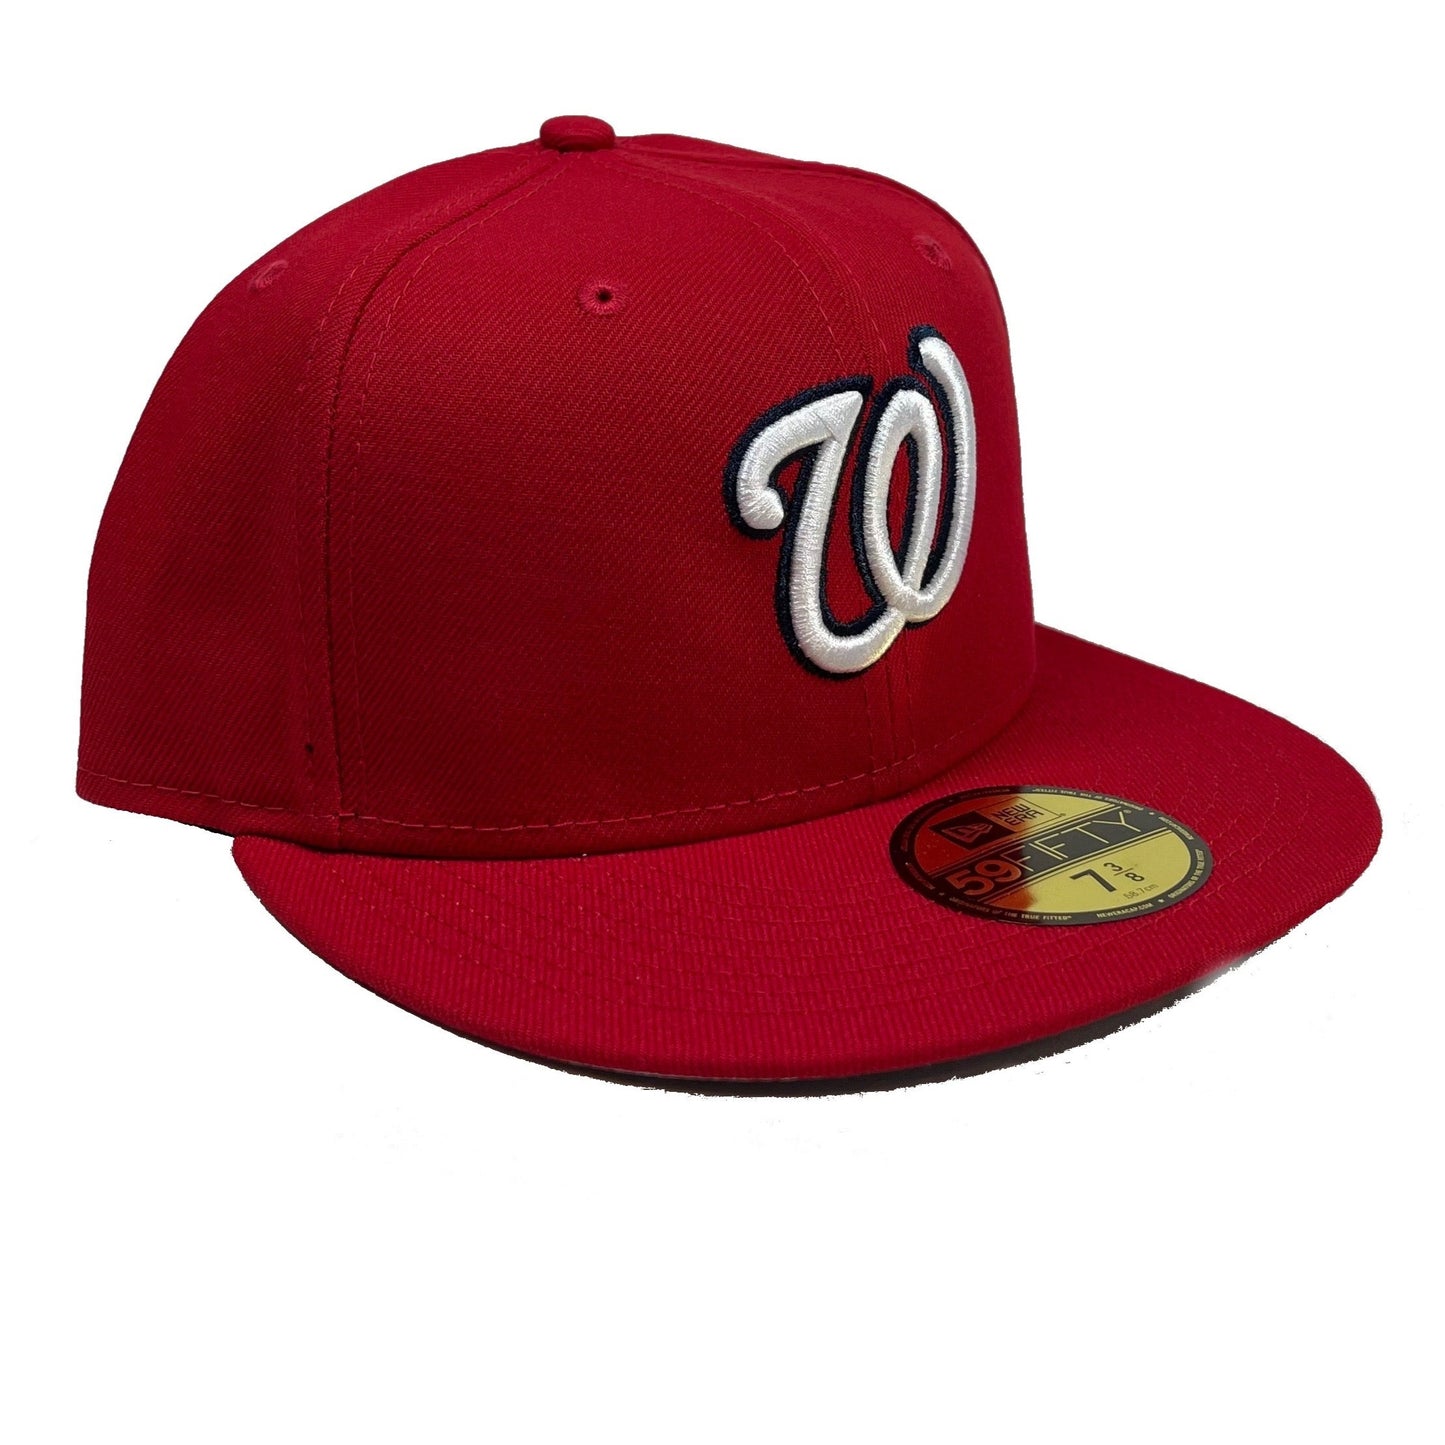 Washington Nationals (Red) Snapback/Fitted